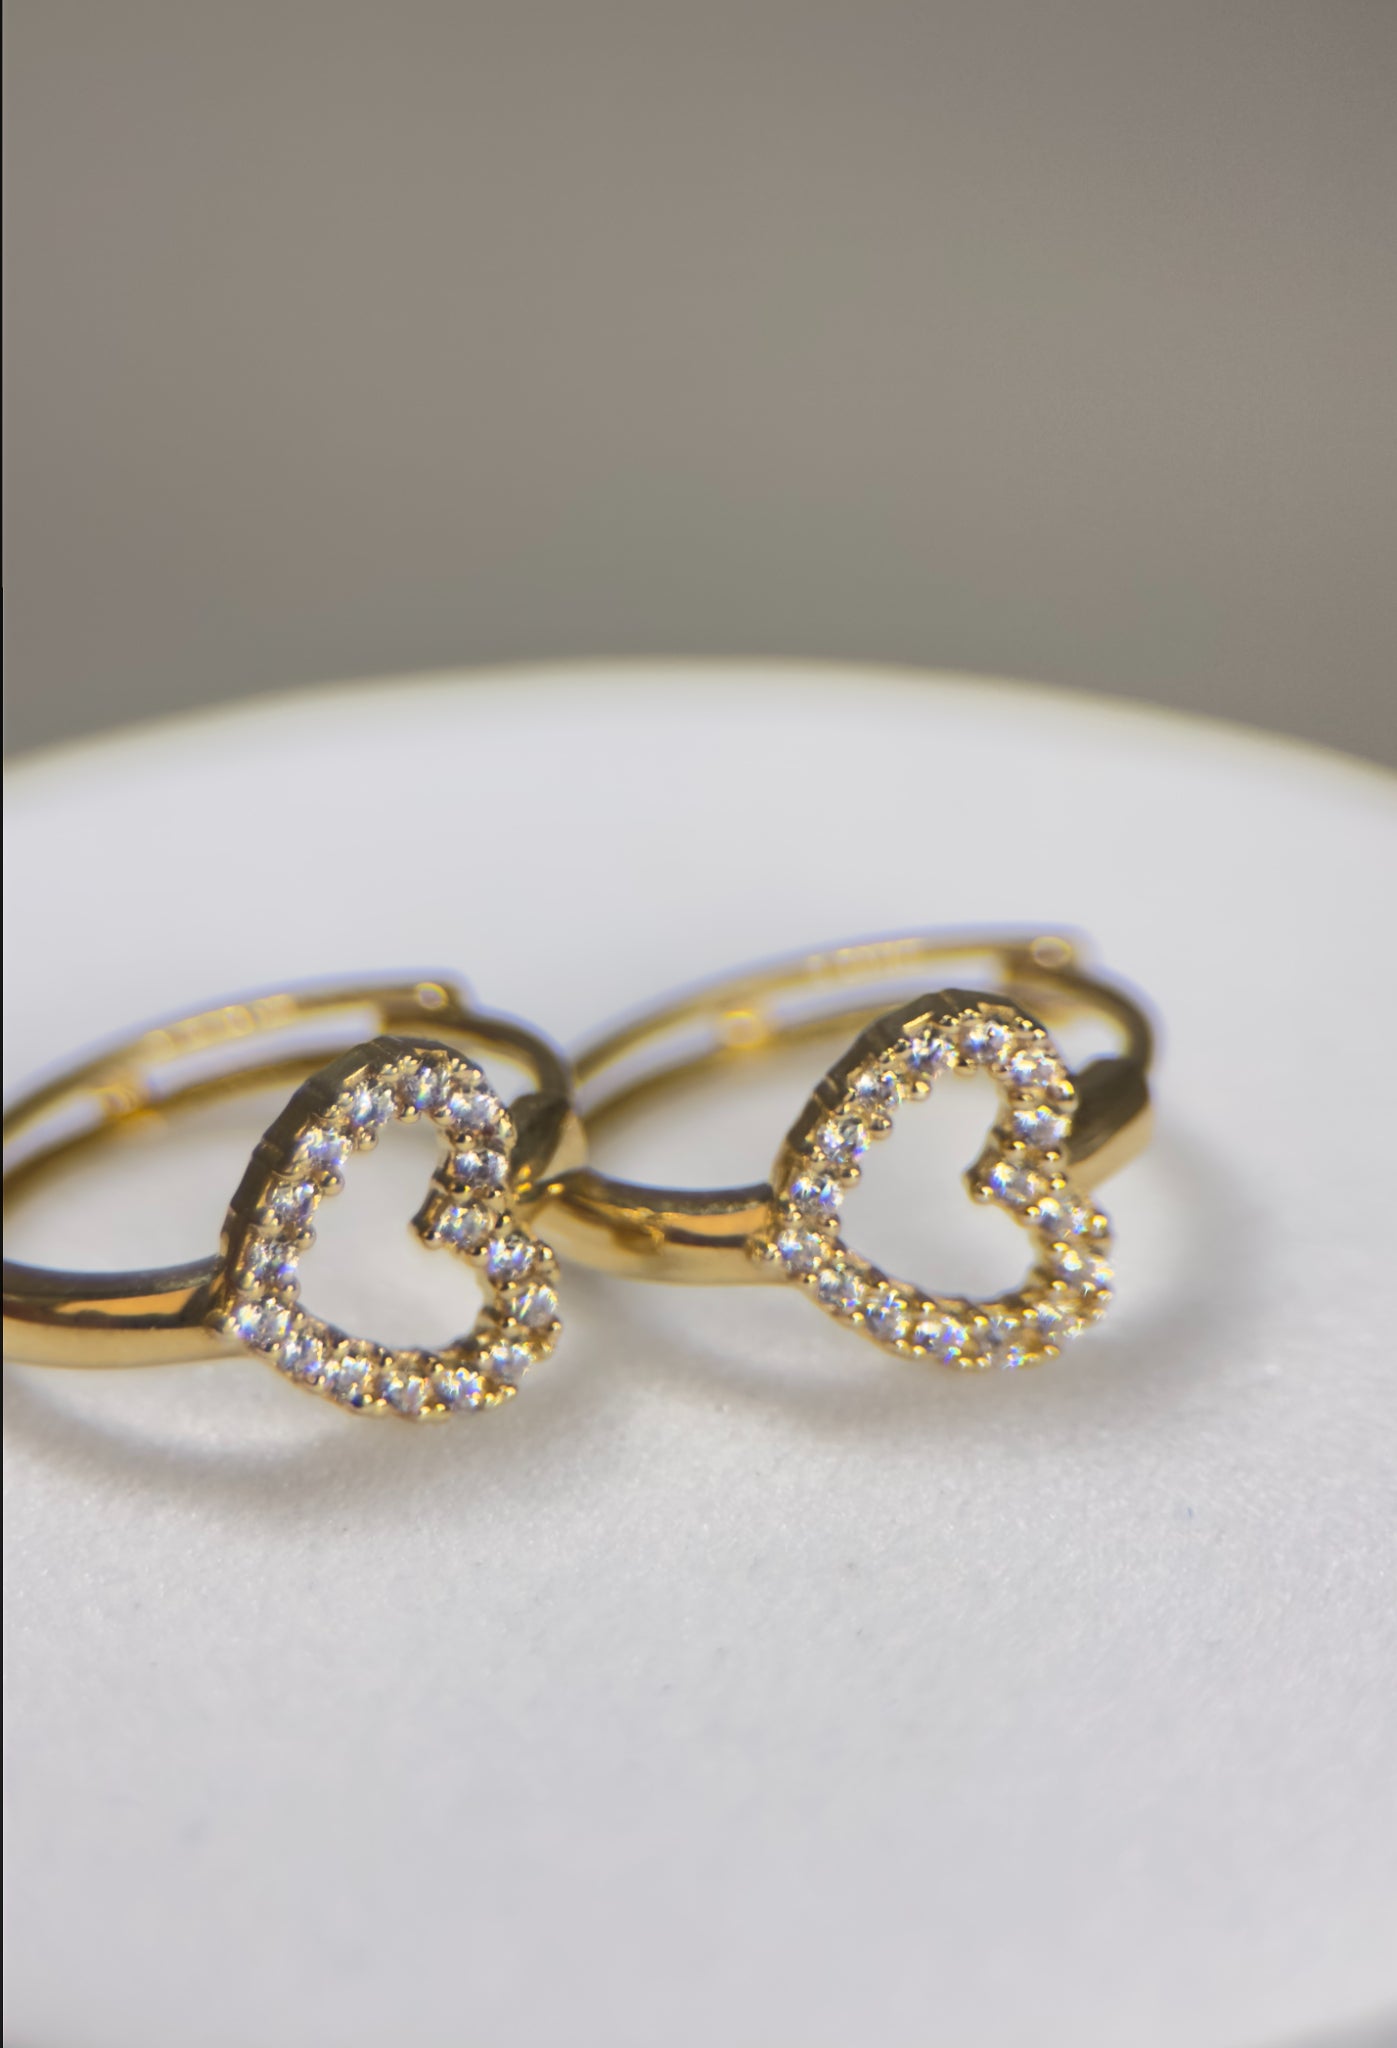 DR2423 - 14K Yellow Gold - Lab Created Stones - 14K Yellow Gold Huggies - Hearts